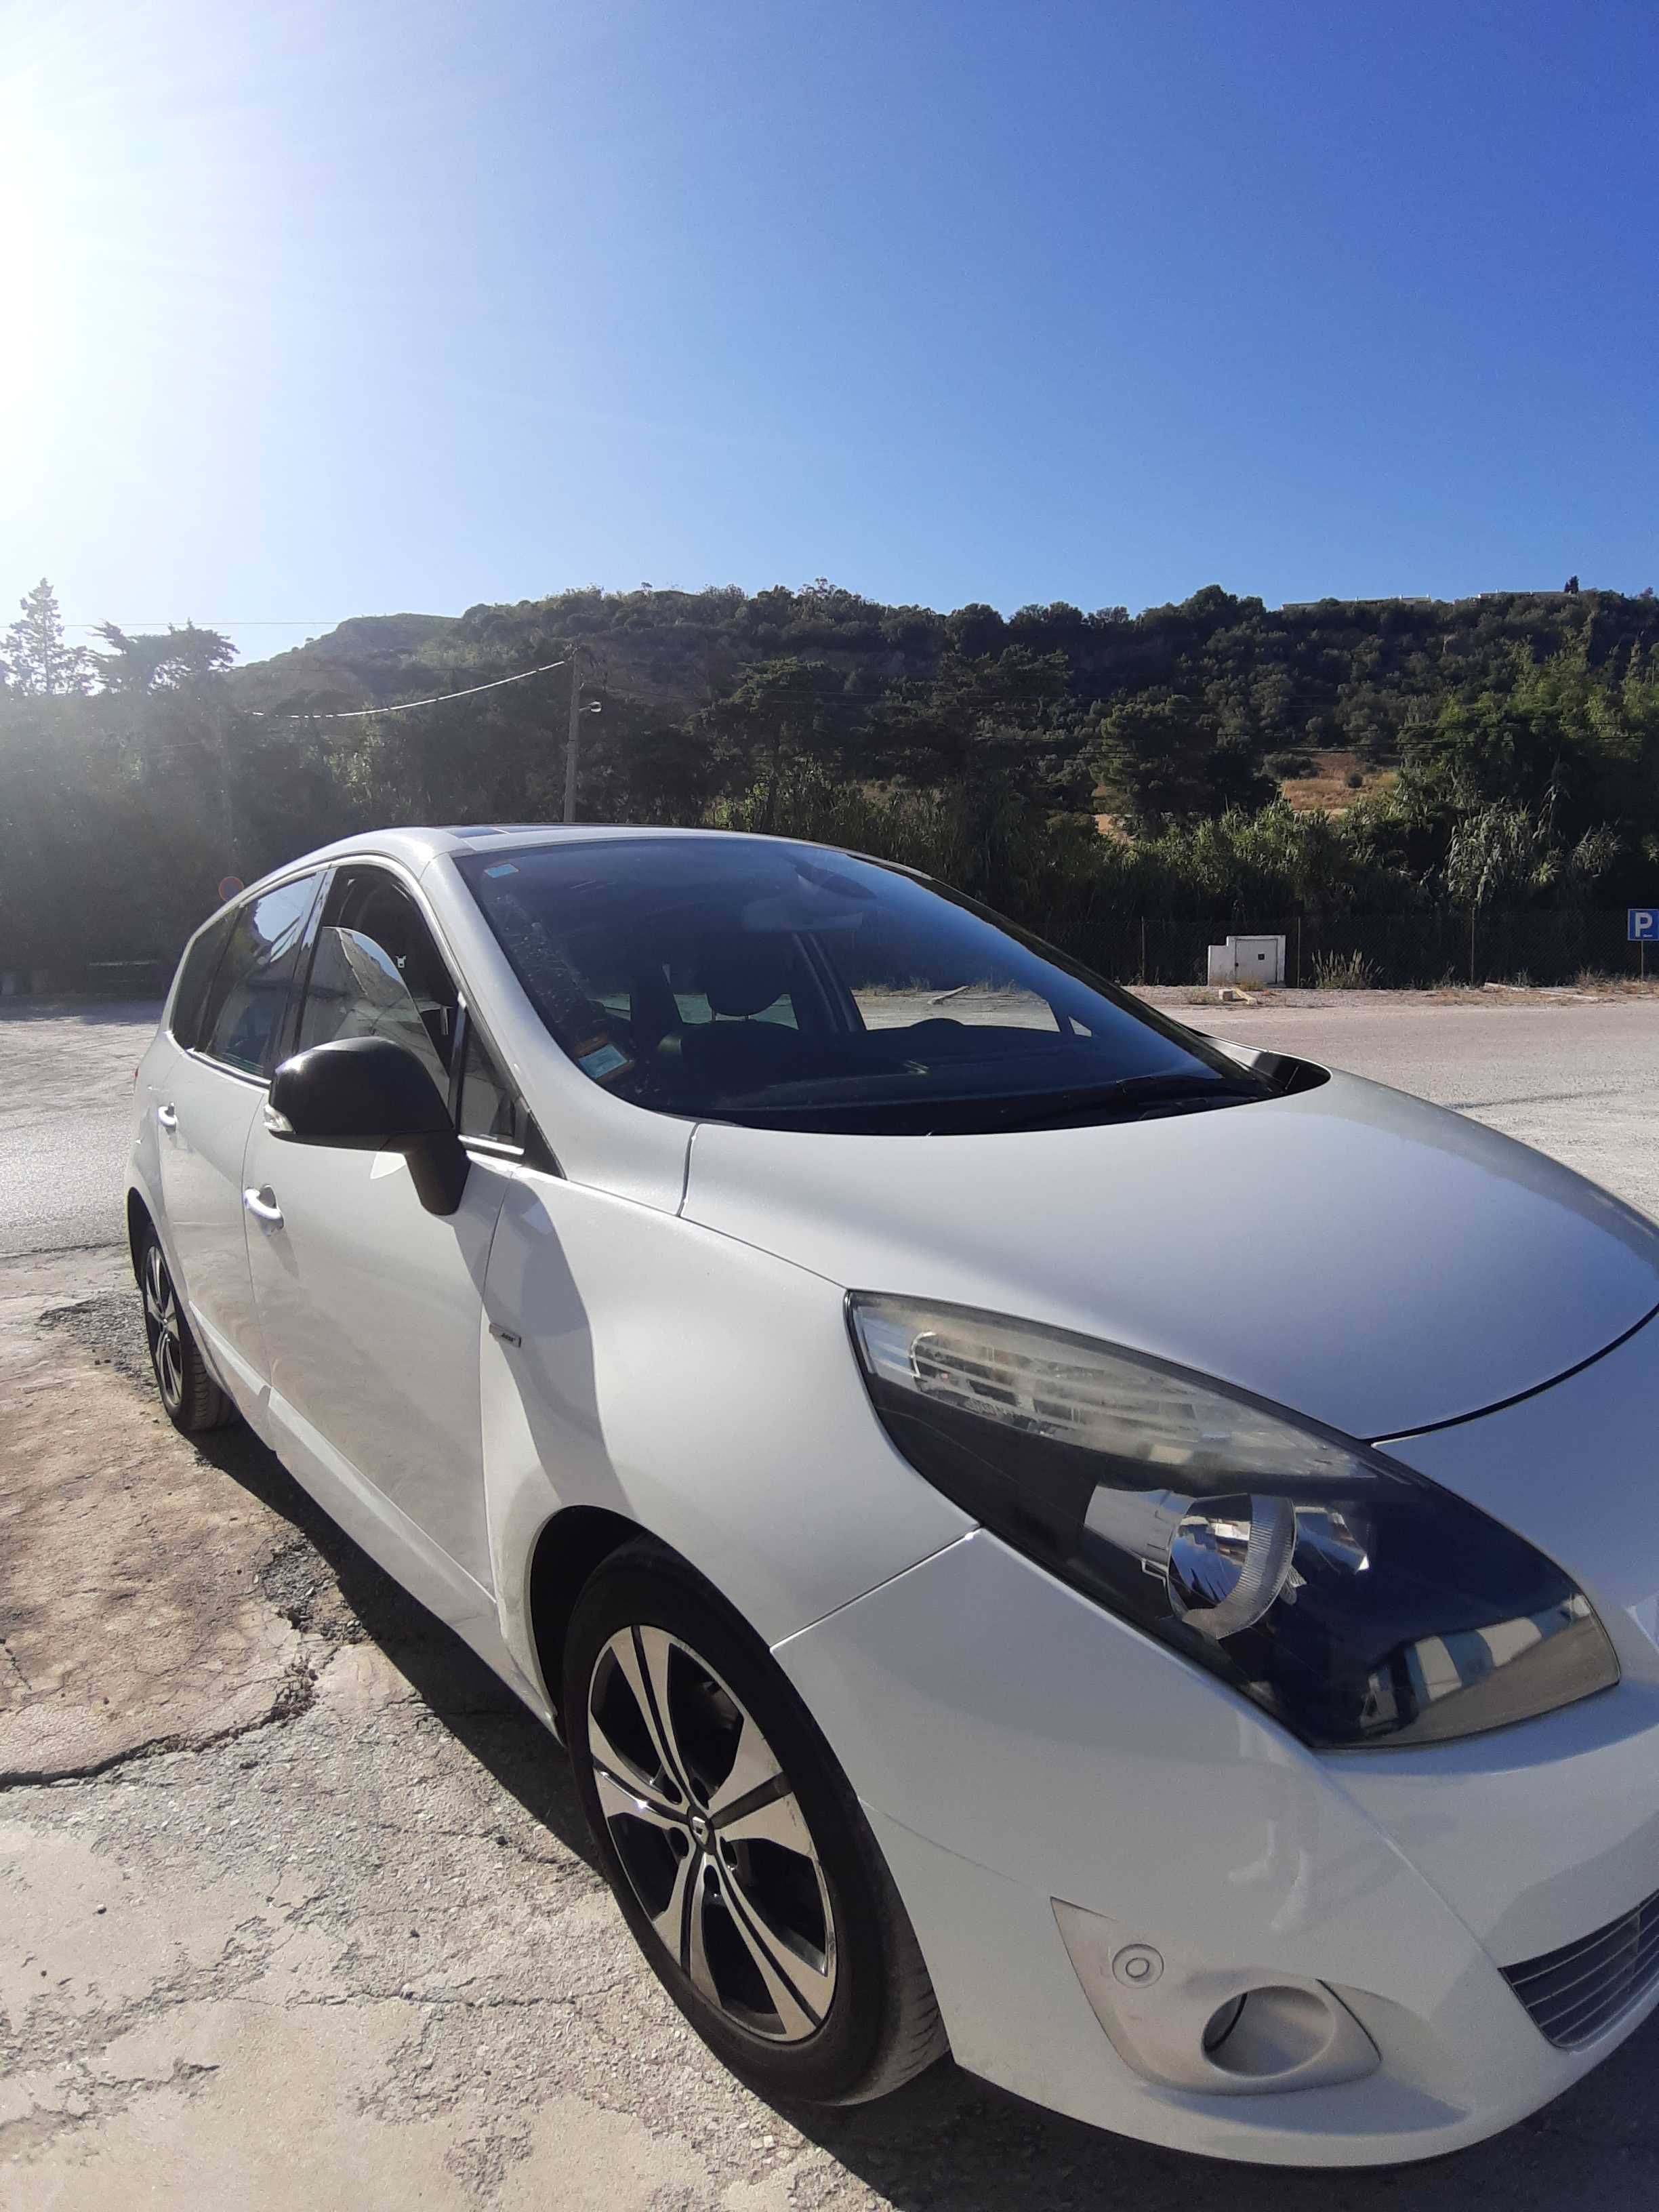 Renault Grand Scénic 1.6 dci Bose Edition 7 L